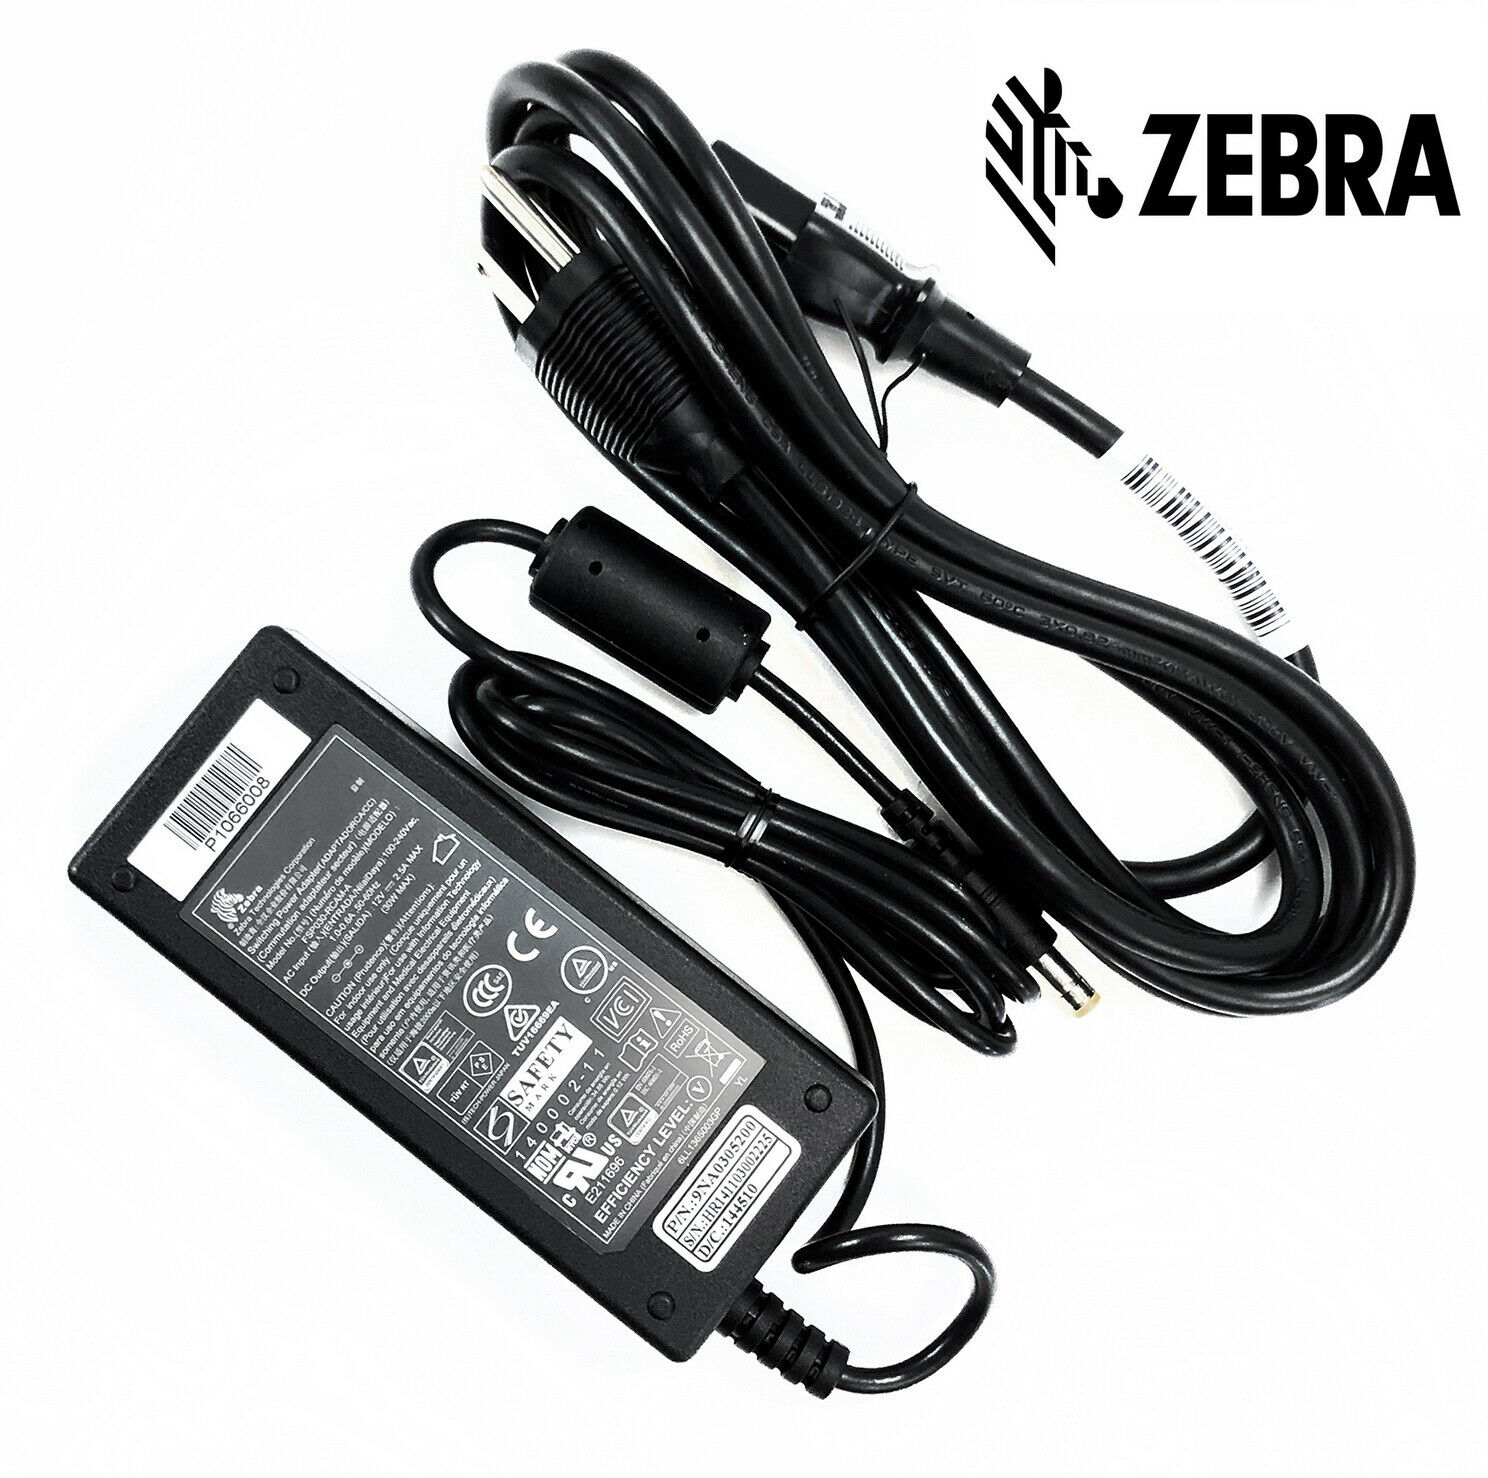 NEW Original AC DC Power Adapter For Zebra QLn220 QLn320 Label Printer w/US Cord Country/Region of Manufacture: Japan - Click Image to Close